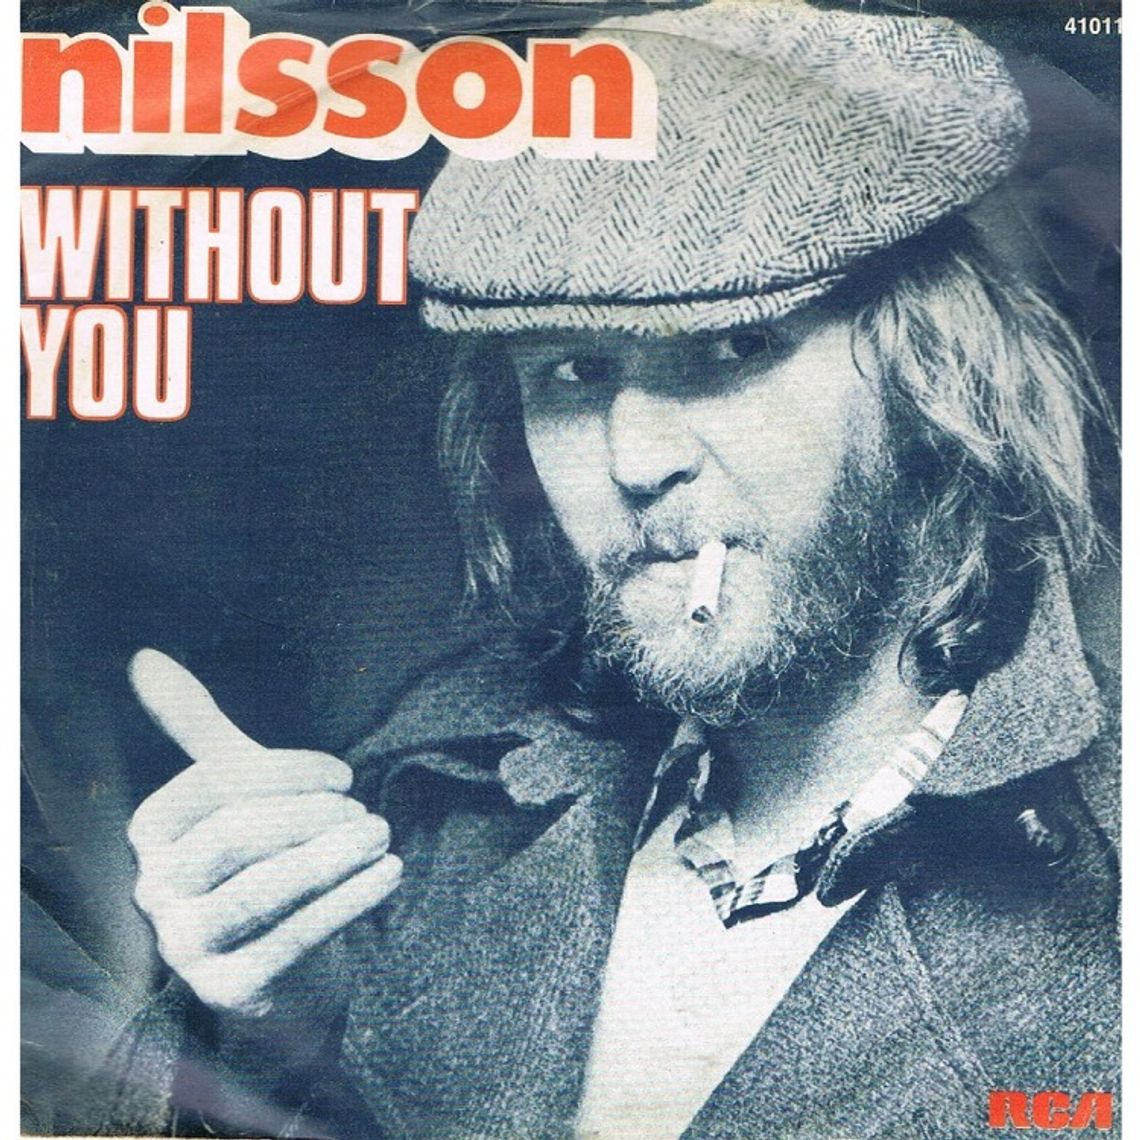 HARRY NILSSON "Without you"